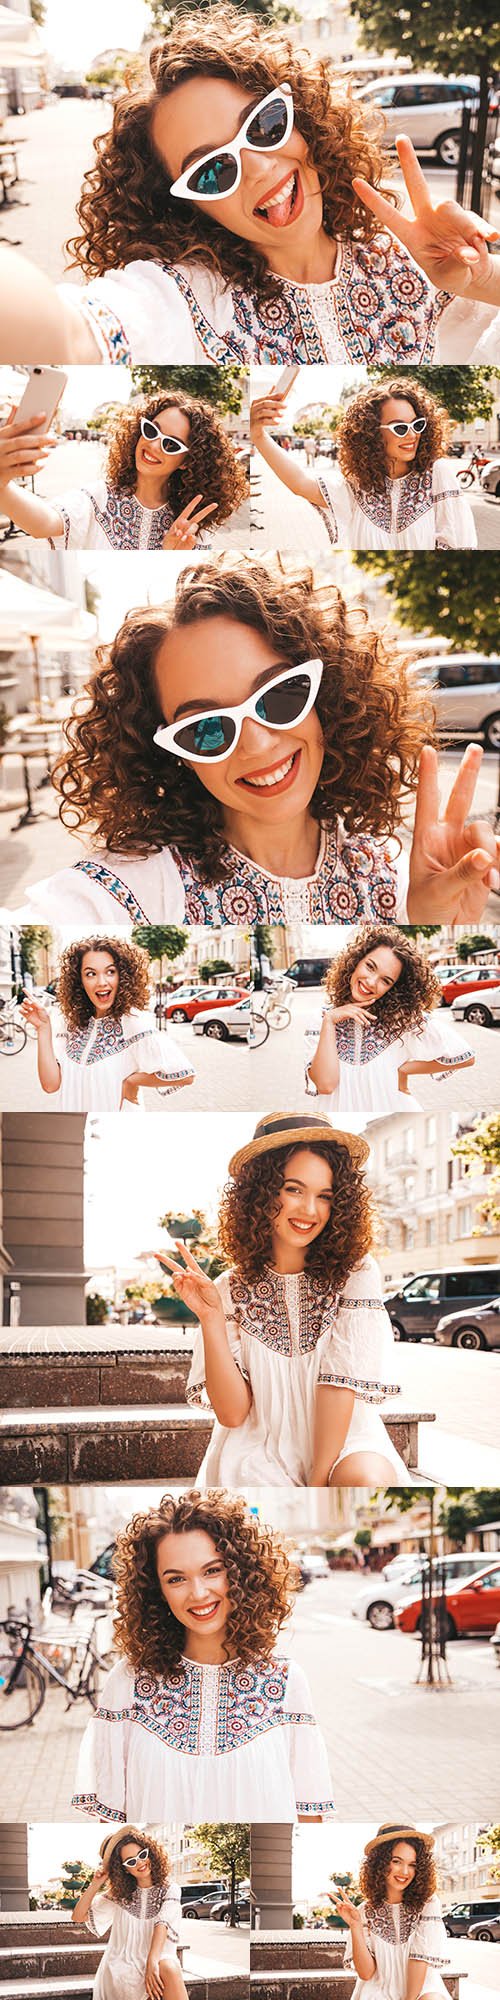 Smiling girl with hairstyle afro curls in dress